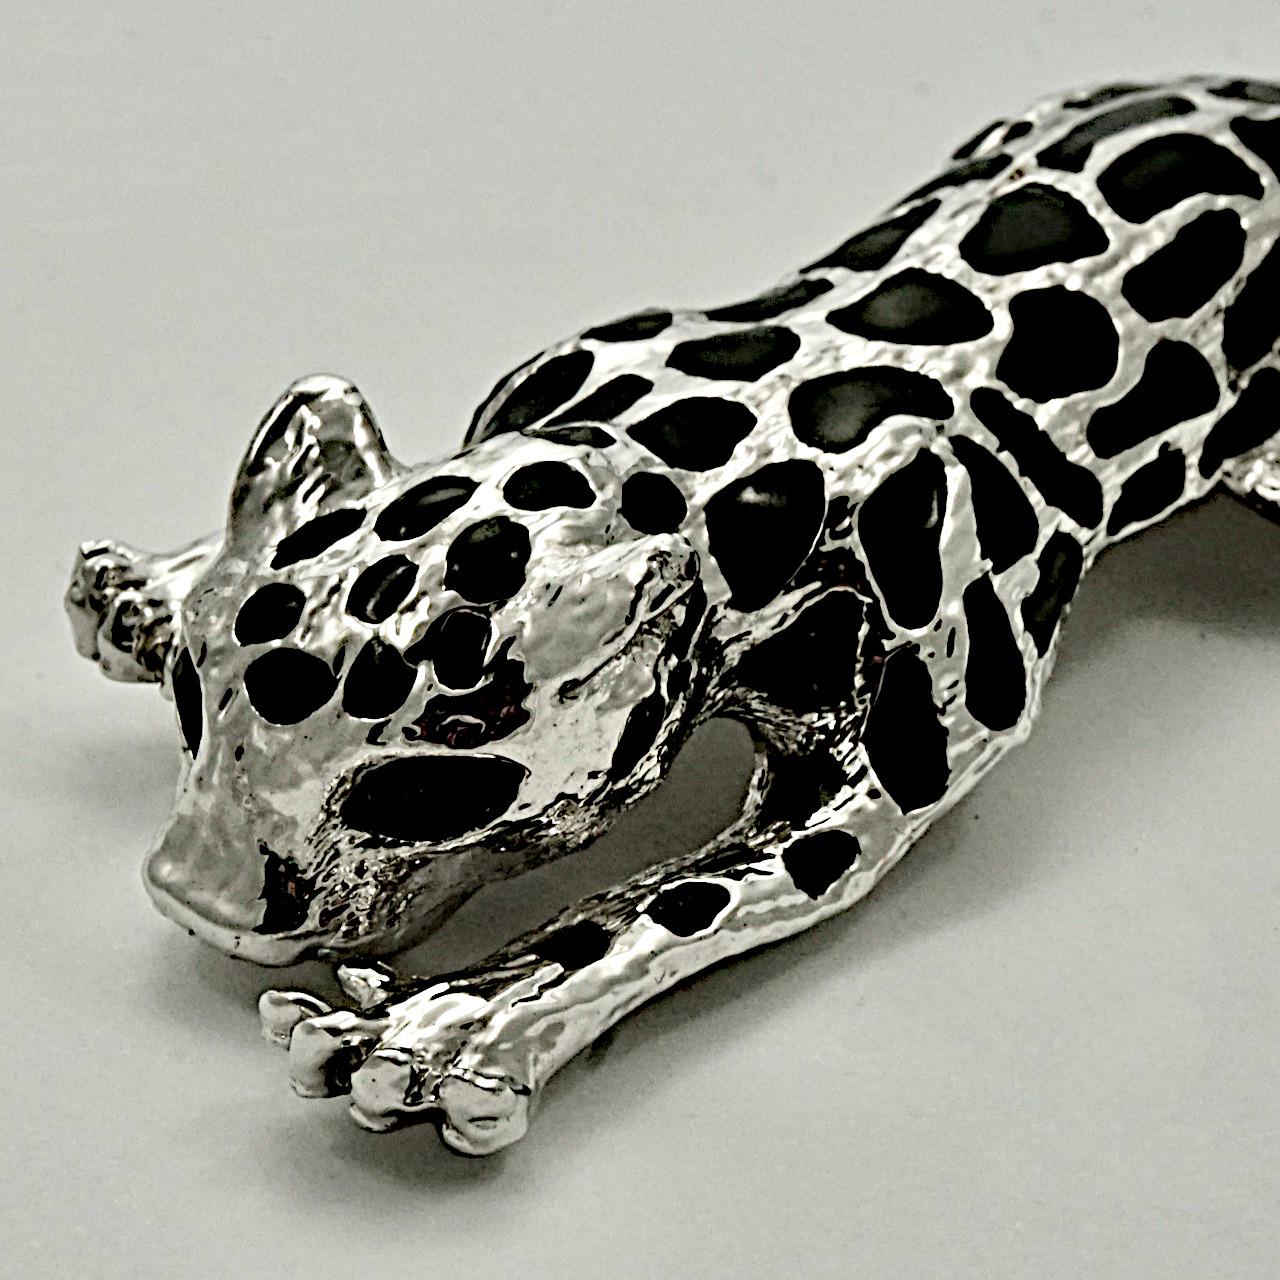 Stylish silver plated cat leopard brooch with black rhinestone eyes, and featuring a moveable tail. This is a large brooch measuring length 13 cm / 5.1 inches by maximum width 3.6 cm / 1.4 inches. The brooch is in very good condition.

This